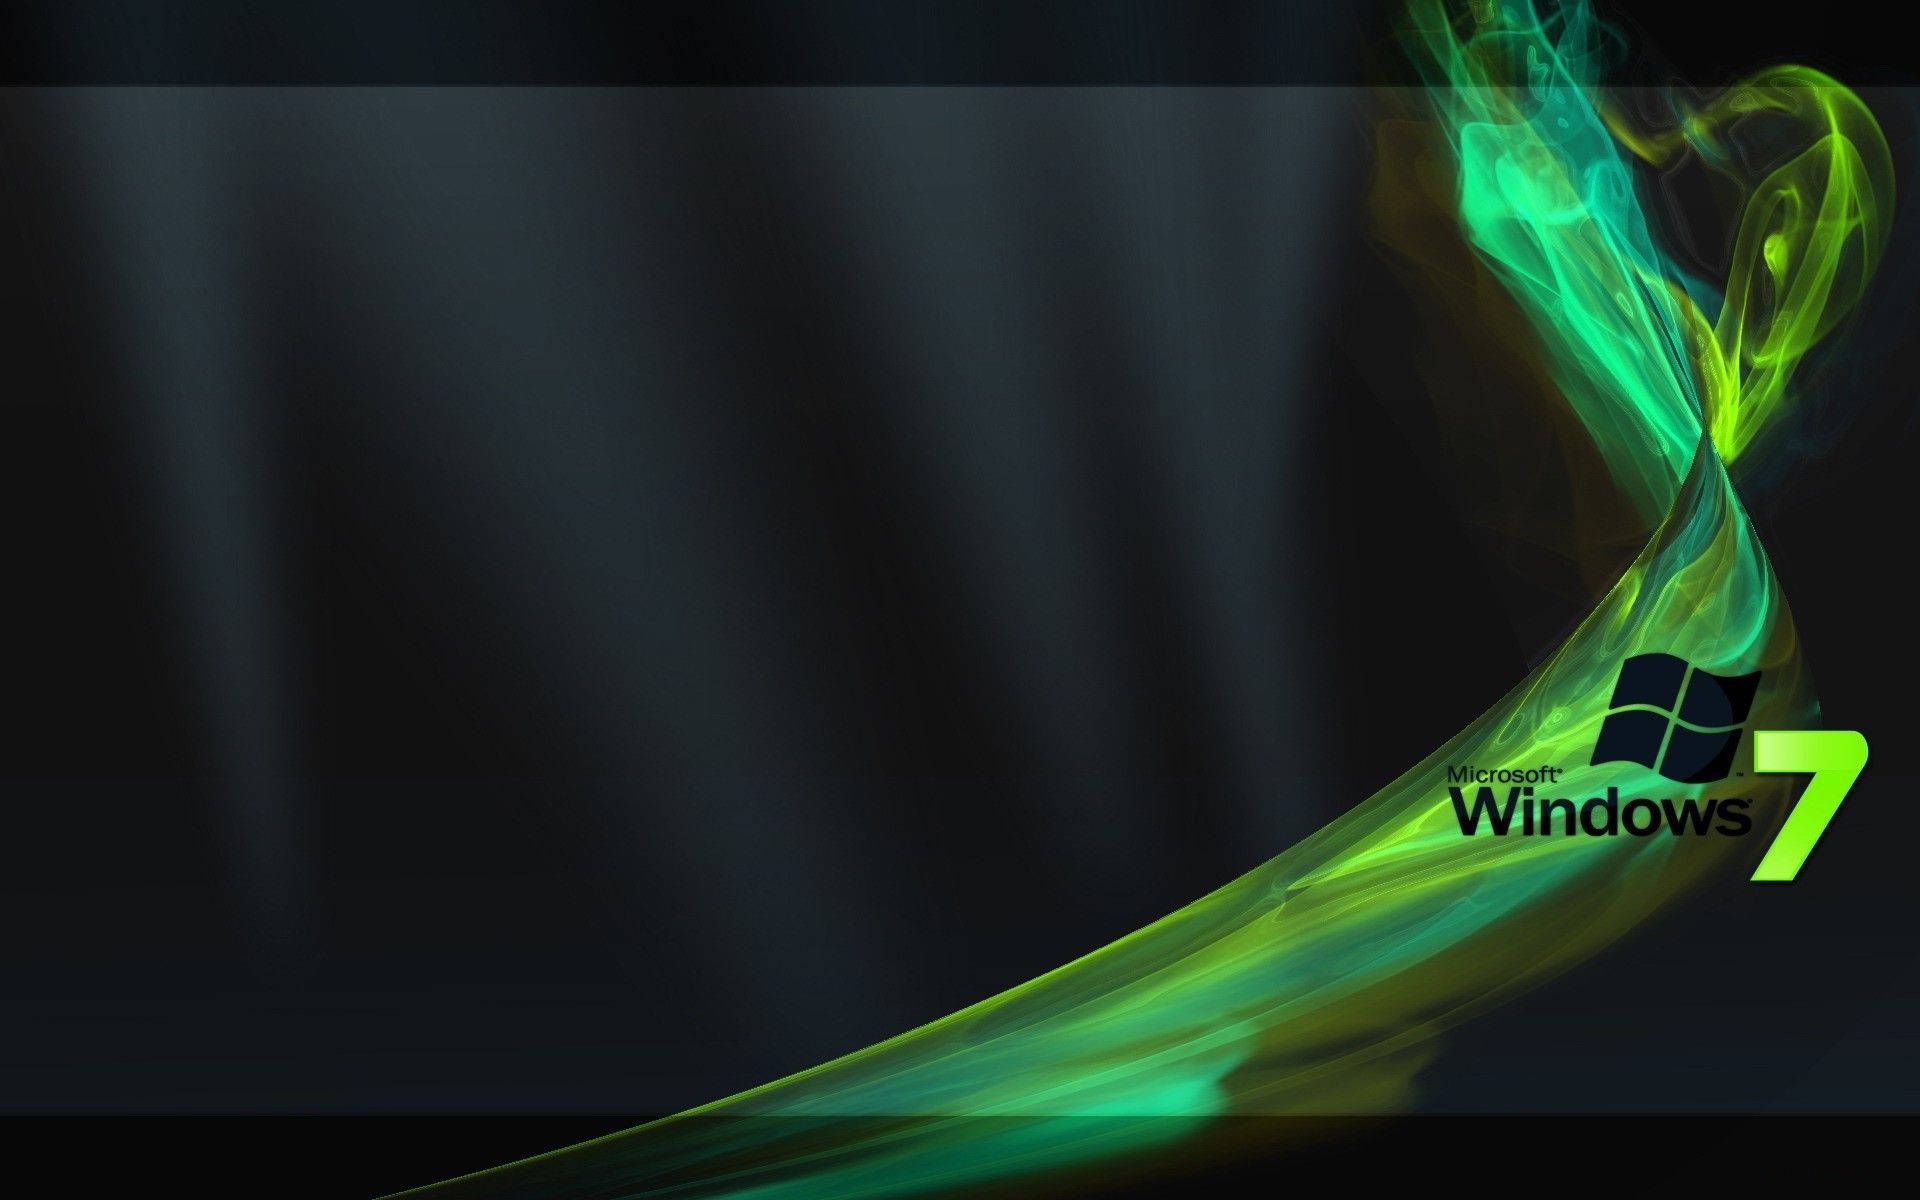 Windows 7 wallpaper with a black background and green smoke - Windows 10